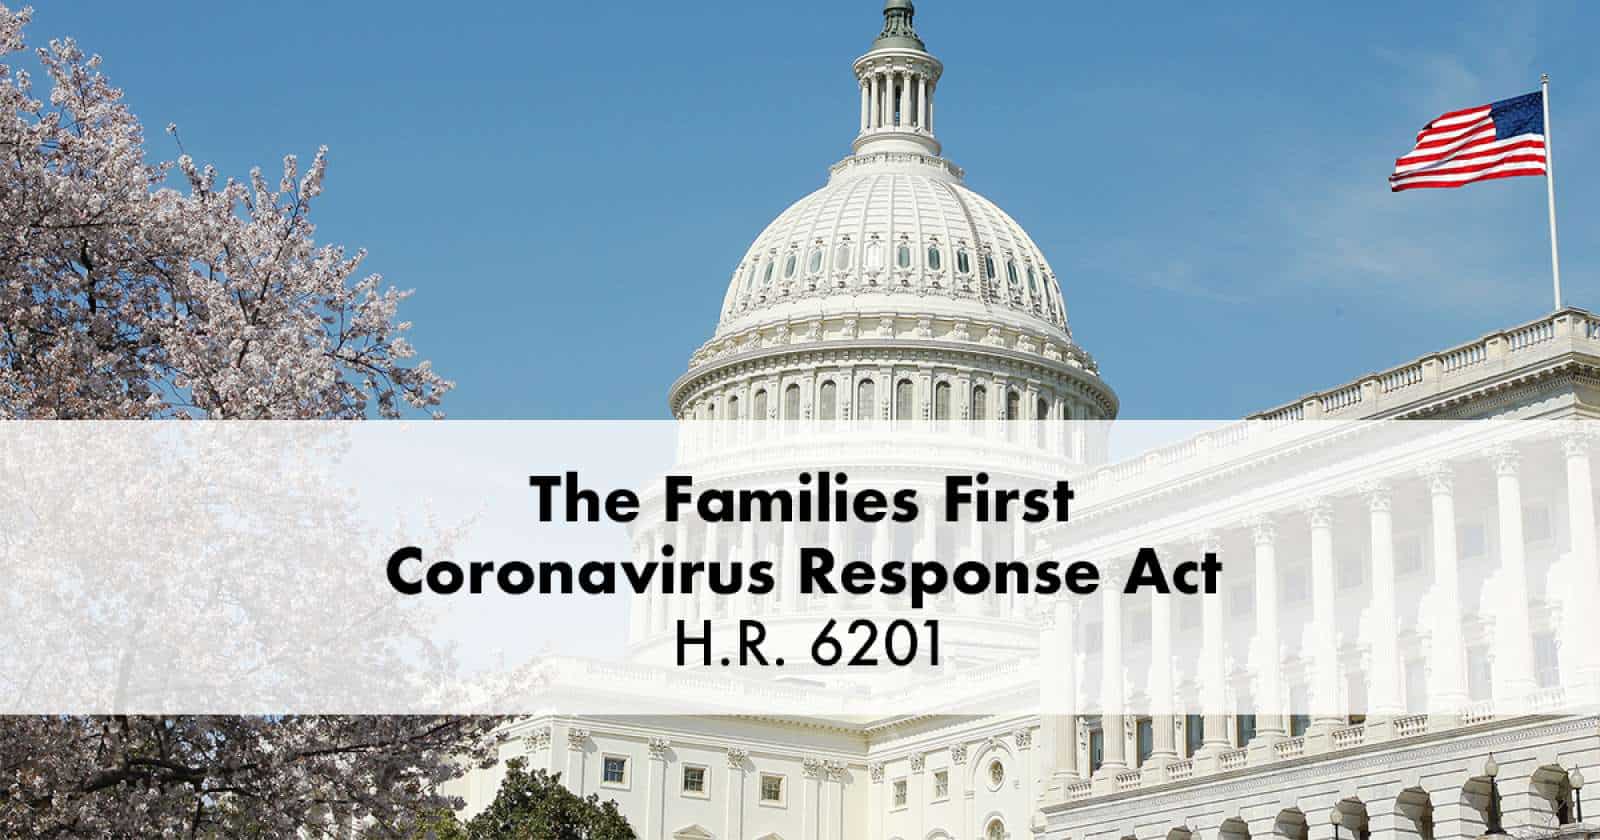 LJSL LEGAL ALERT: Families First Coronavirus Response Act – What Employers Need to Know Now